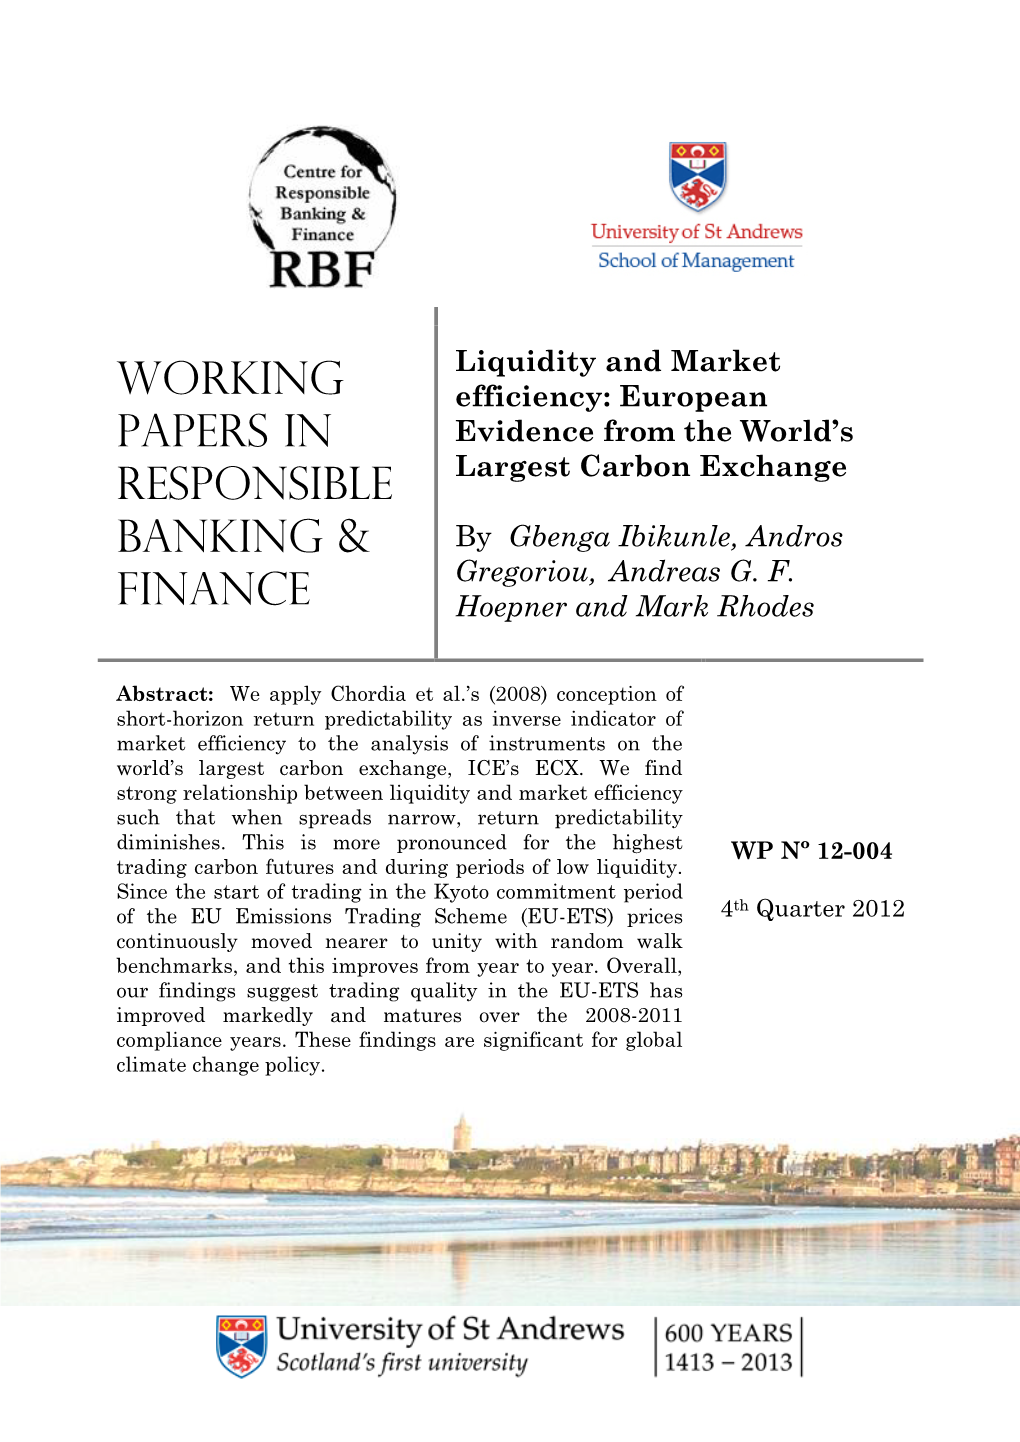 Working Papers in Responsible Banking & Finance